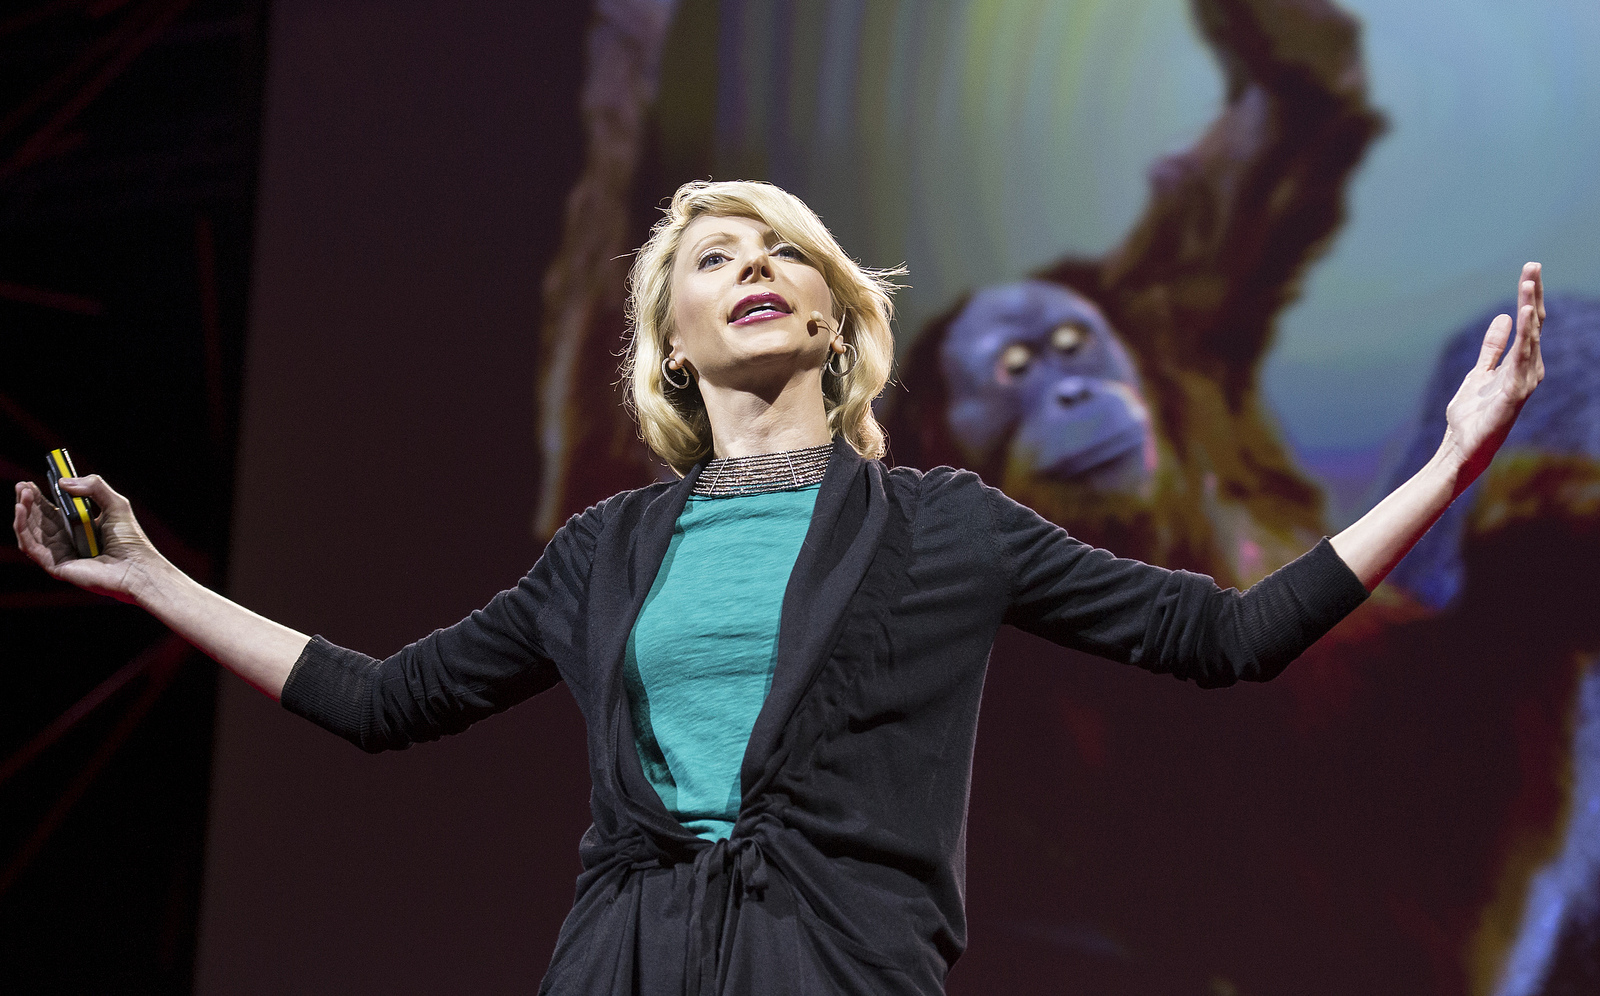 Amy Cuddy demonstrates a classic power pose used by humans and chimps alike — spreading your arms wide to appear more powerful. Photo: James Duncan Davidson